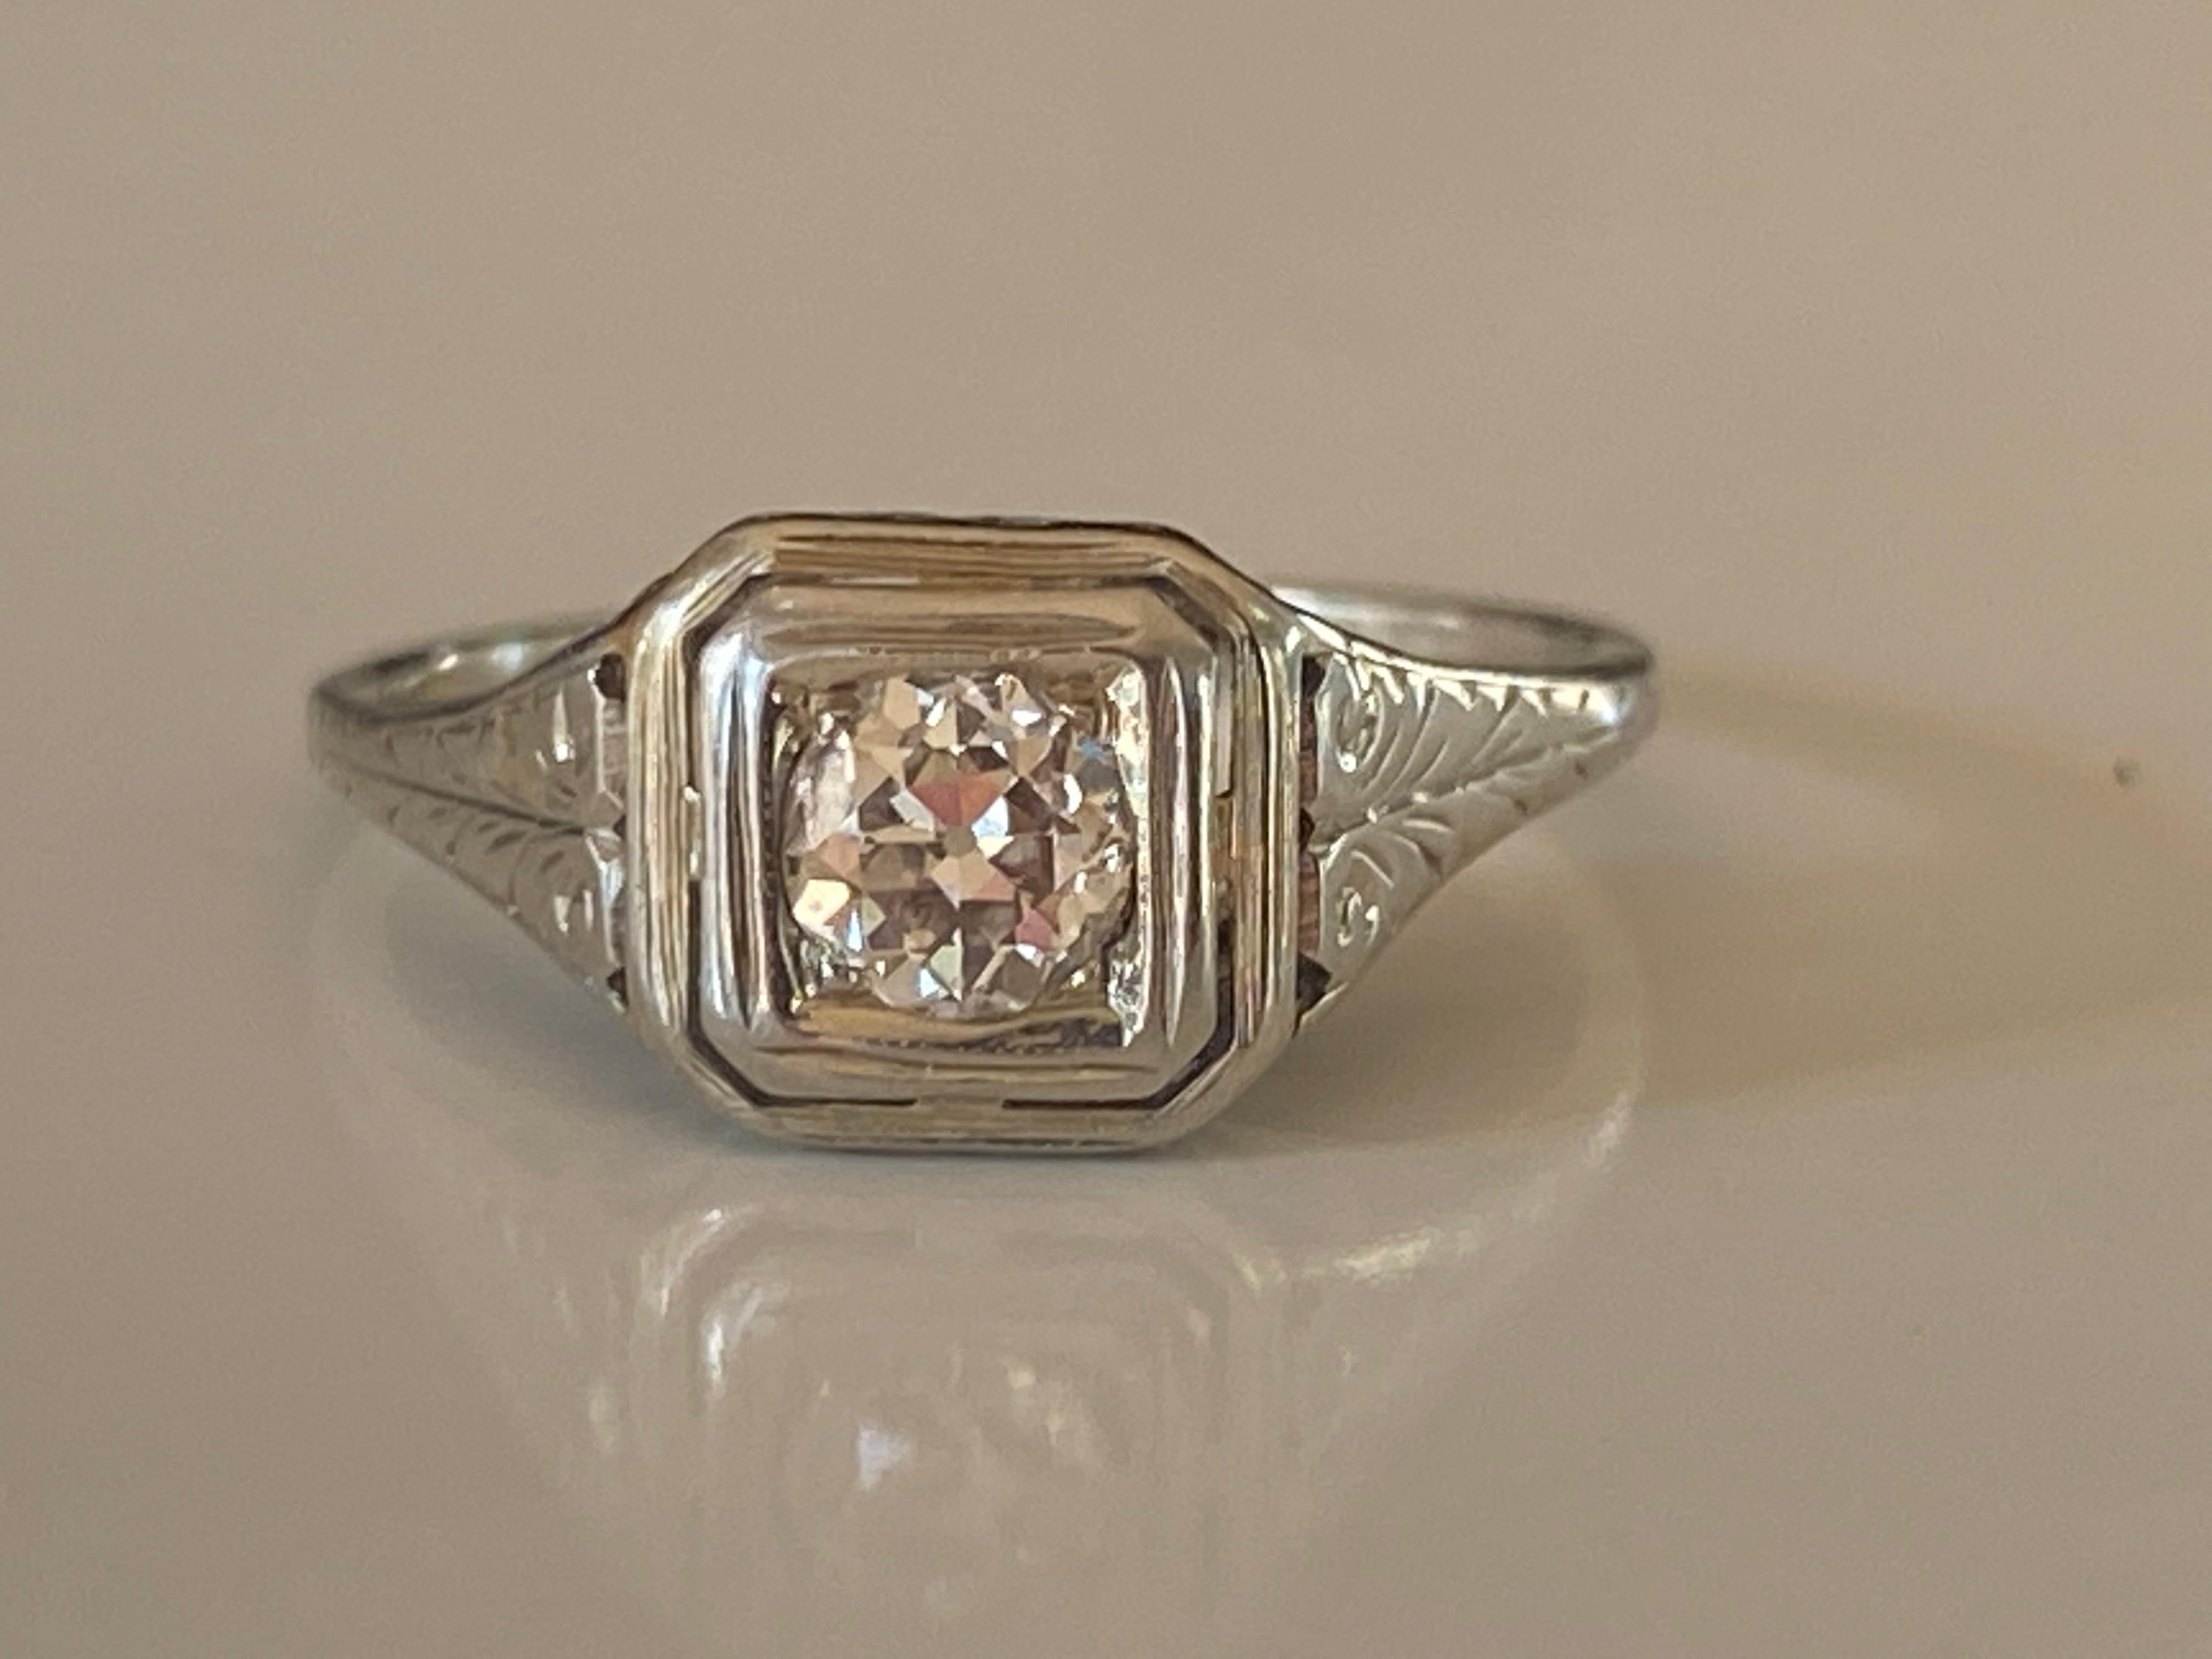 Crafted in the 1930s in 14kt white gold, this striking Art Deco band is set with an Old European cut diamond measuring approximately 0.35 carats, G color, VS clarity and fine filigree details. 
